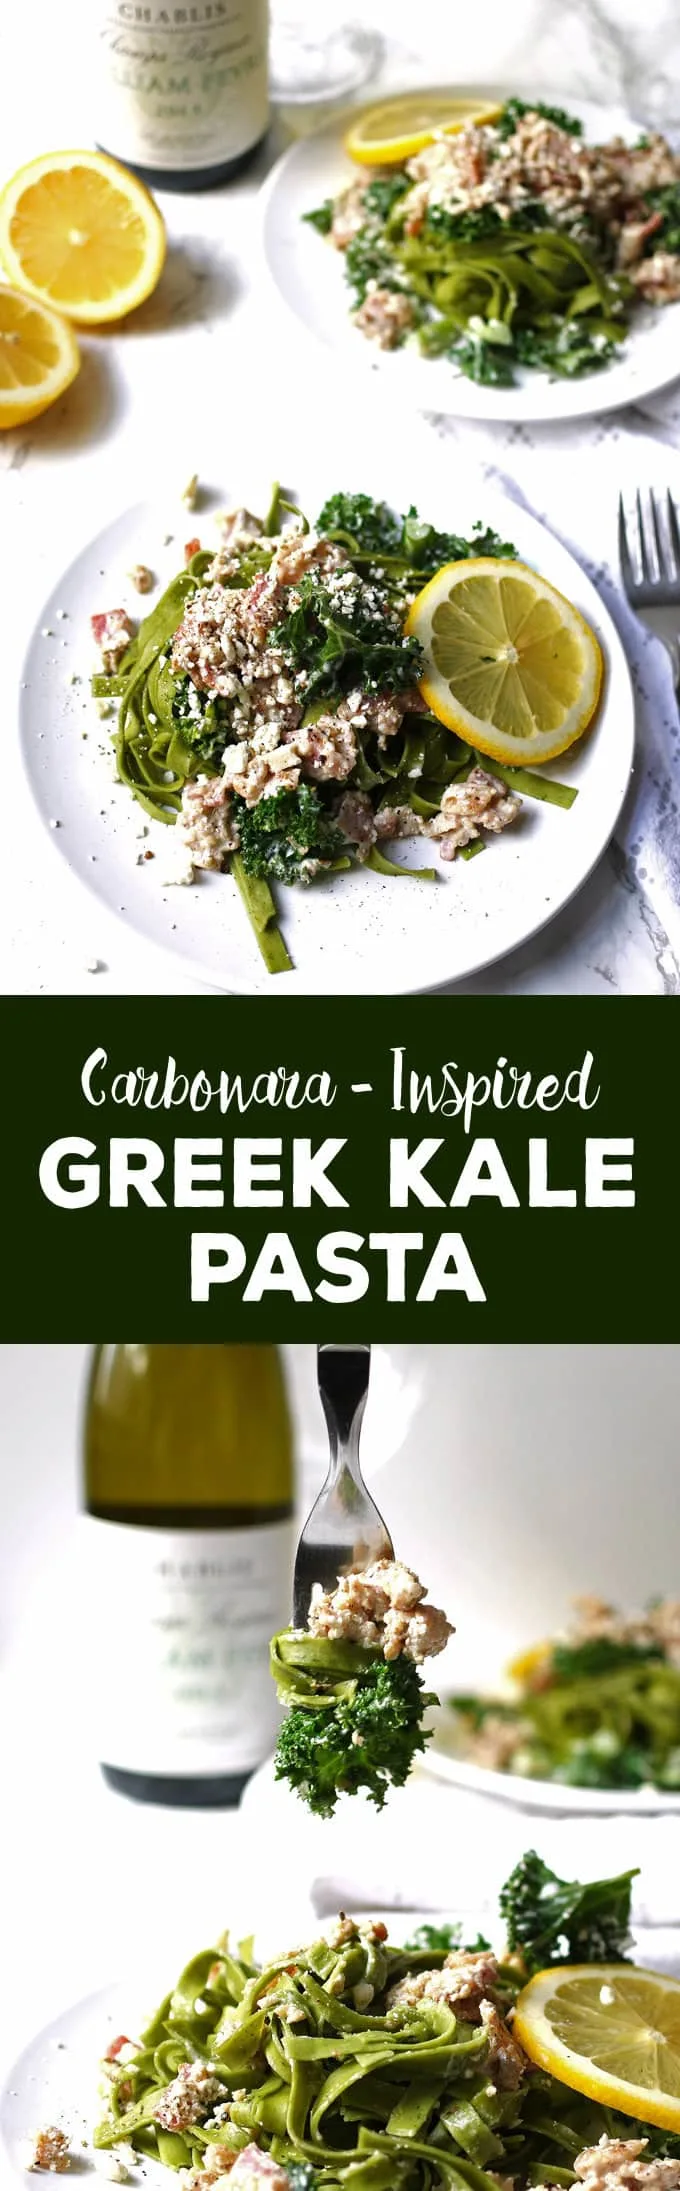 This carbonara-inspired Greek kale pasta is a one-of-a-kind pasta dinner. The flavors of carbonara sauce (bacon!) are combined with elements of Greek cuisine for a savory and delicious dish. | honeyandbirch.com